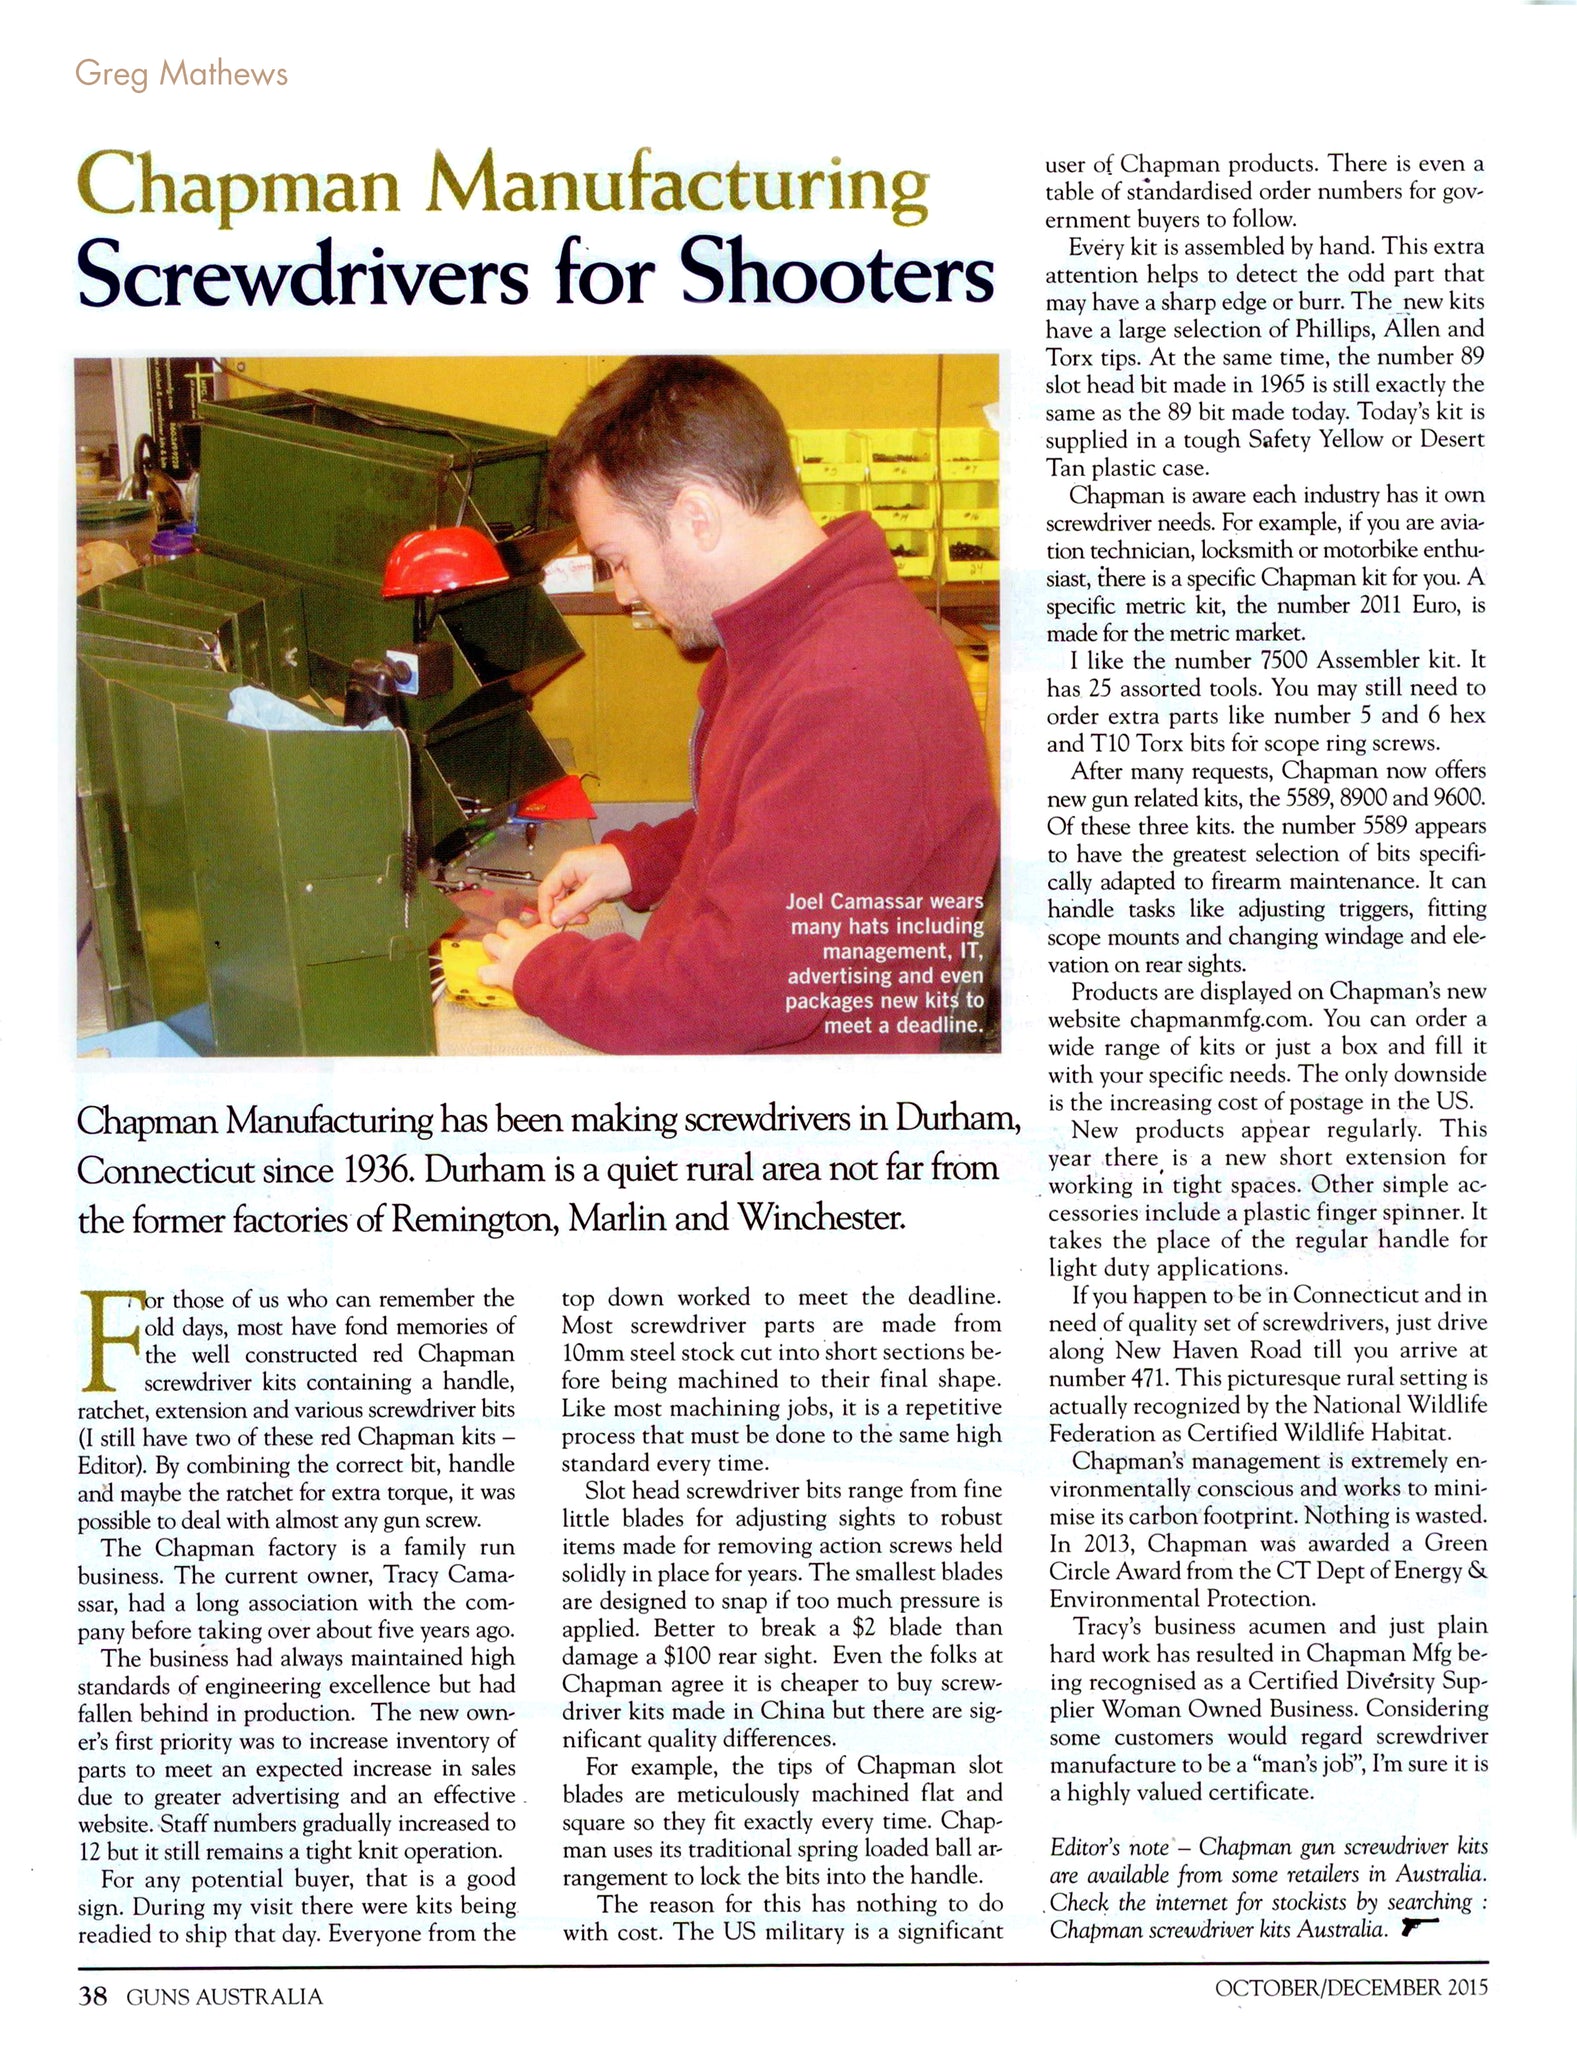 Screwdrivers for Shooters in "Guns Austrailia"